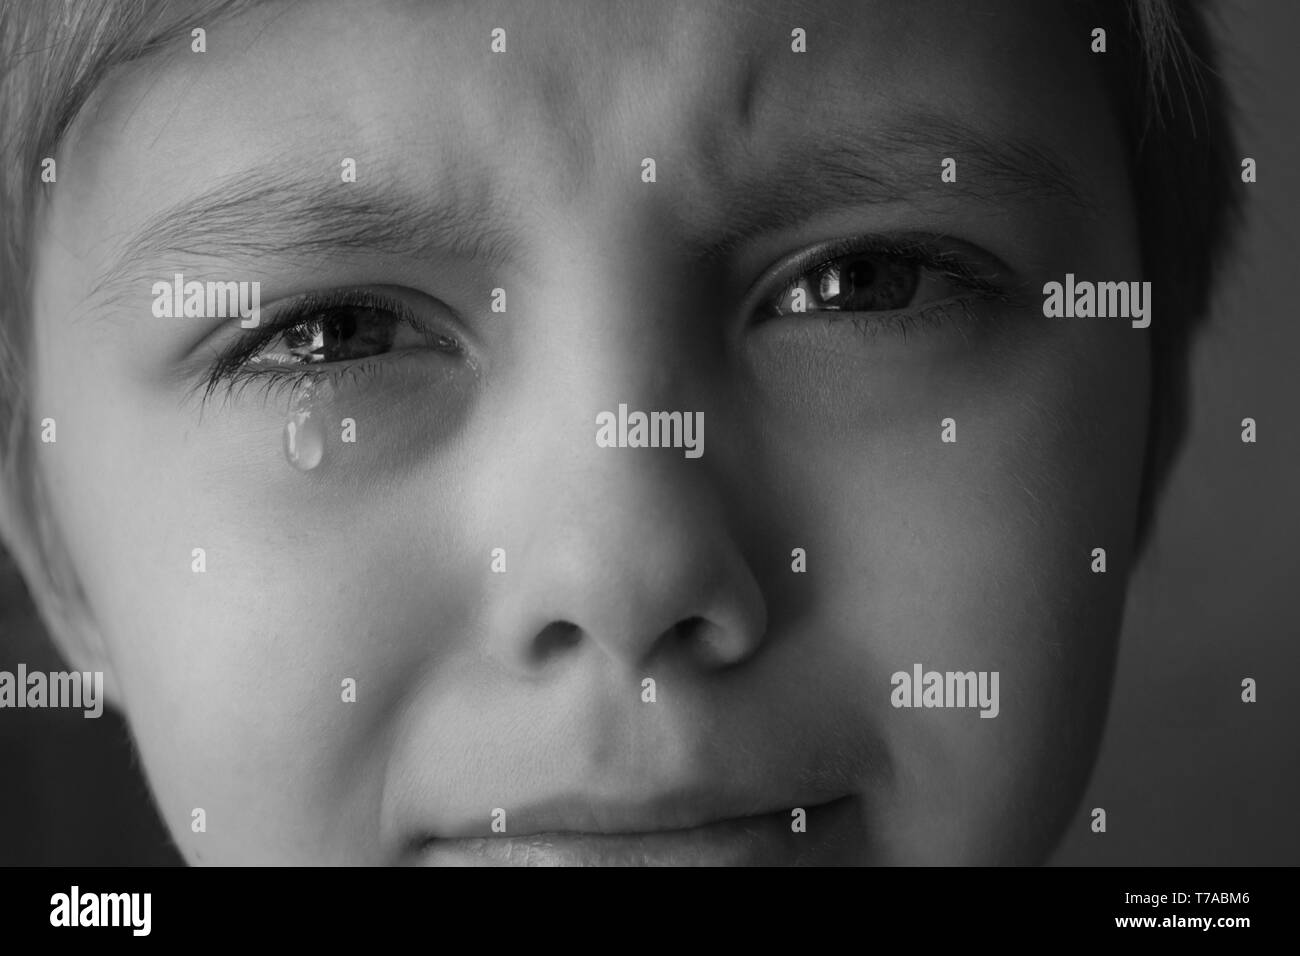 Tears in the eyes of a child. A tear on the boy's cheek. Close-up. Black and white photo. Stock Photo